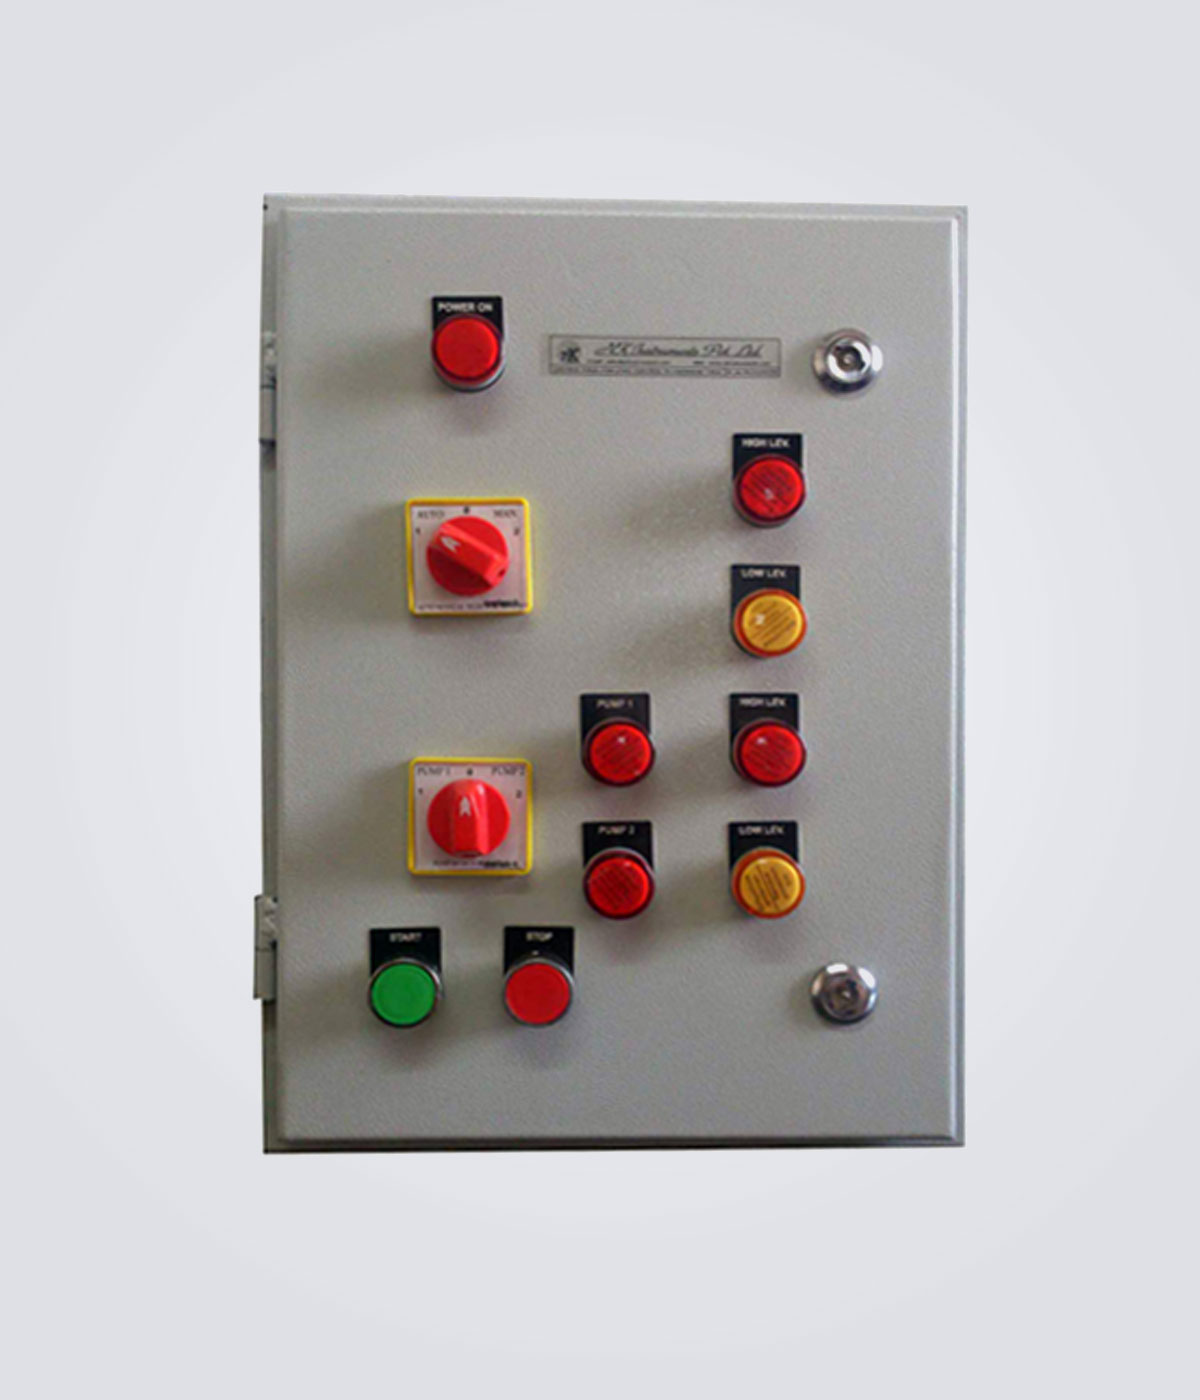 Control Panel for Level Control in Overhead Tank